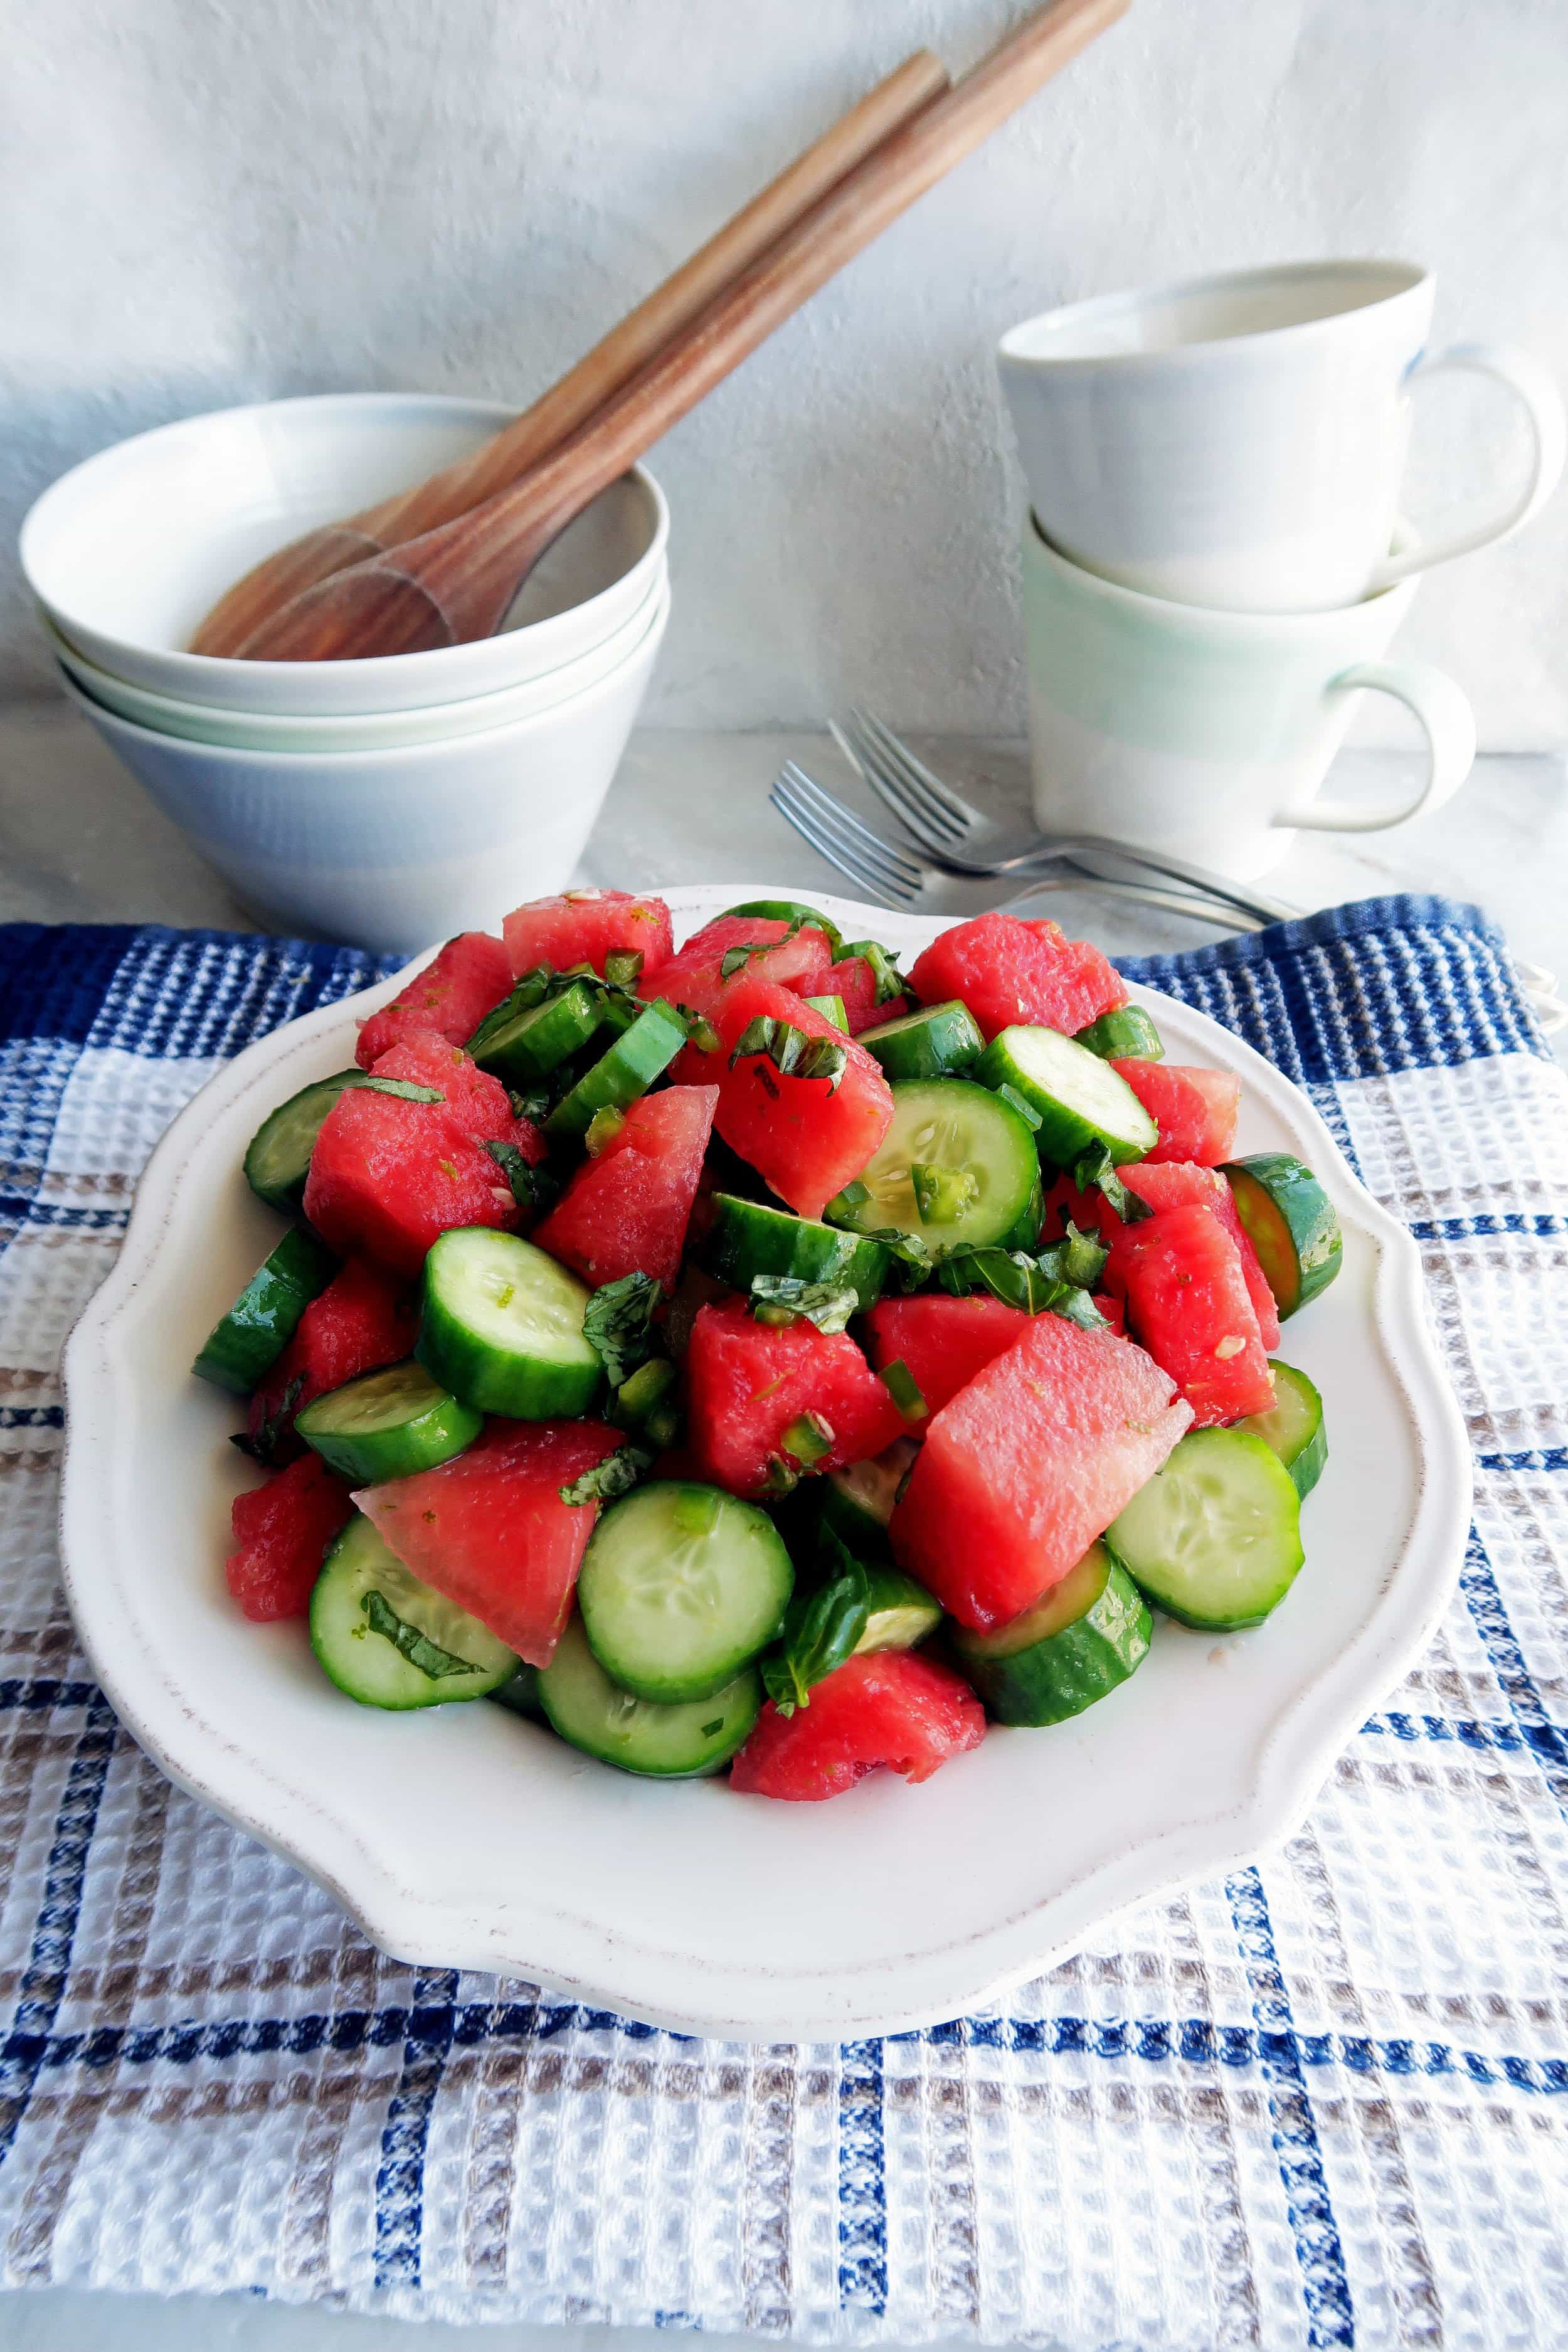 Watermelon Cucumber Jalapeno Salad on a white plate with three bowls, two wooden spoons, two forks, and two cups in the background.